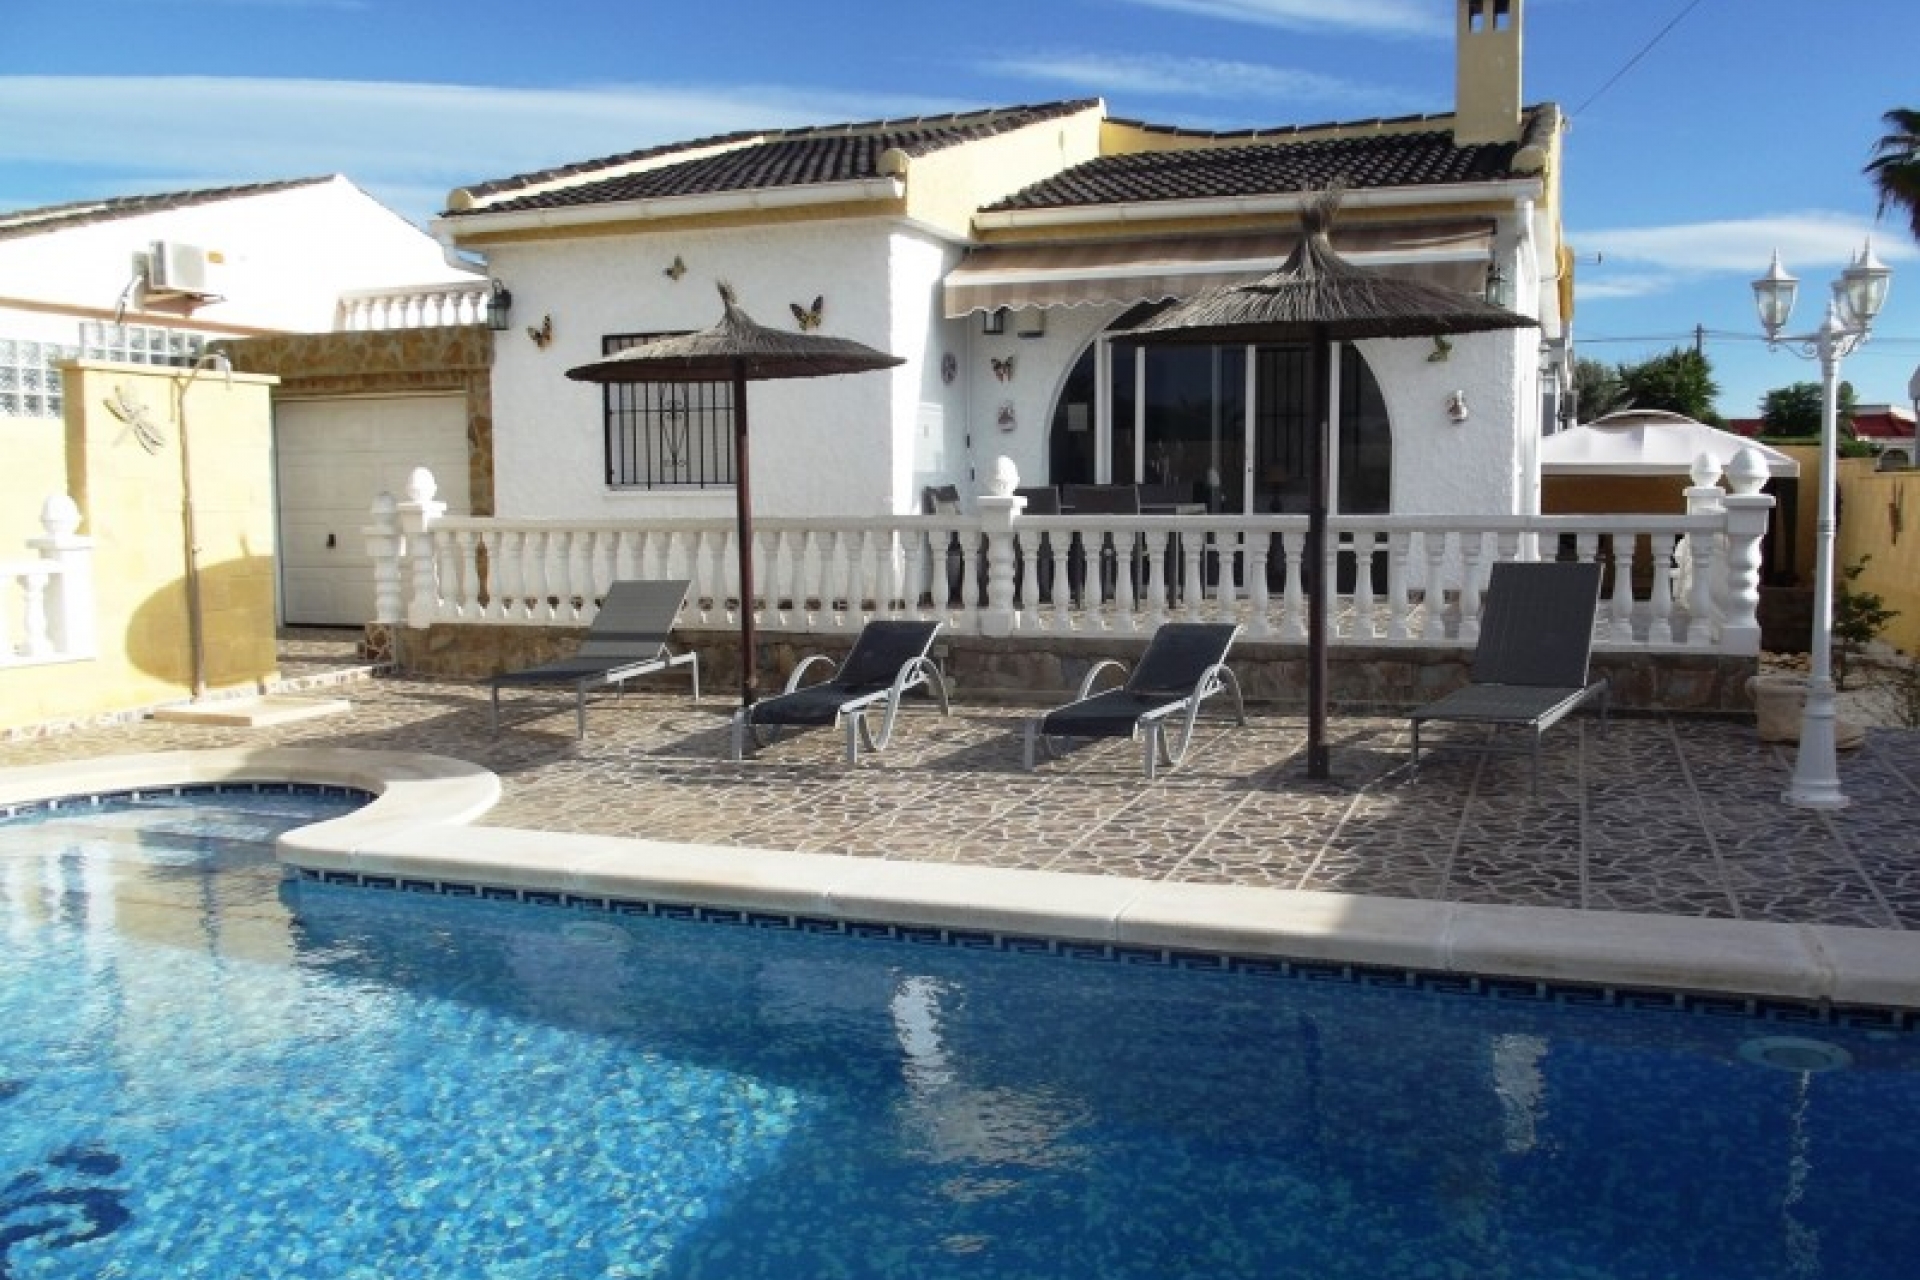 Cheap bargain property for sale Spain costa blanca